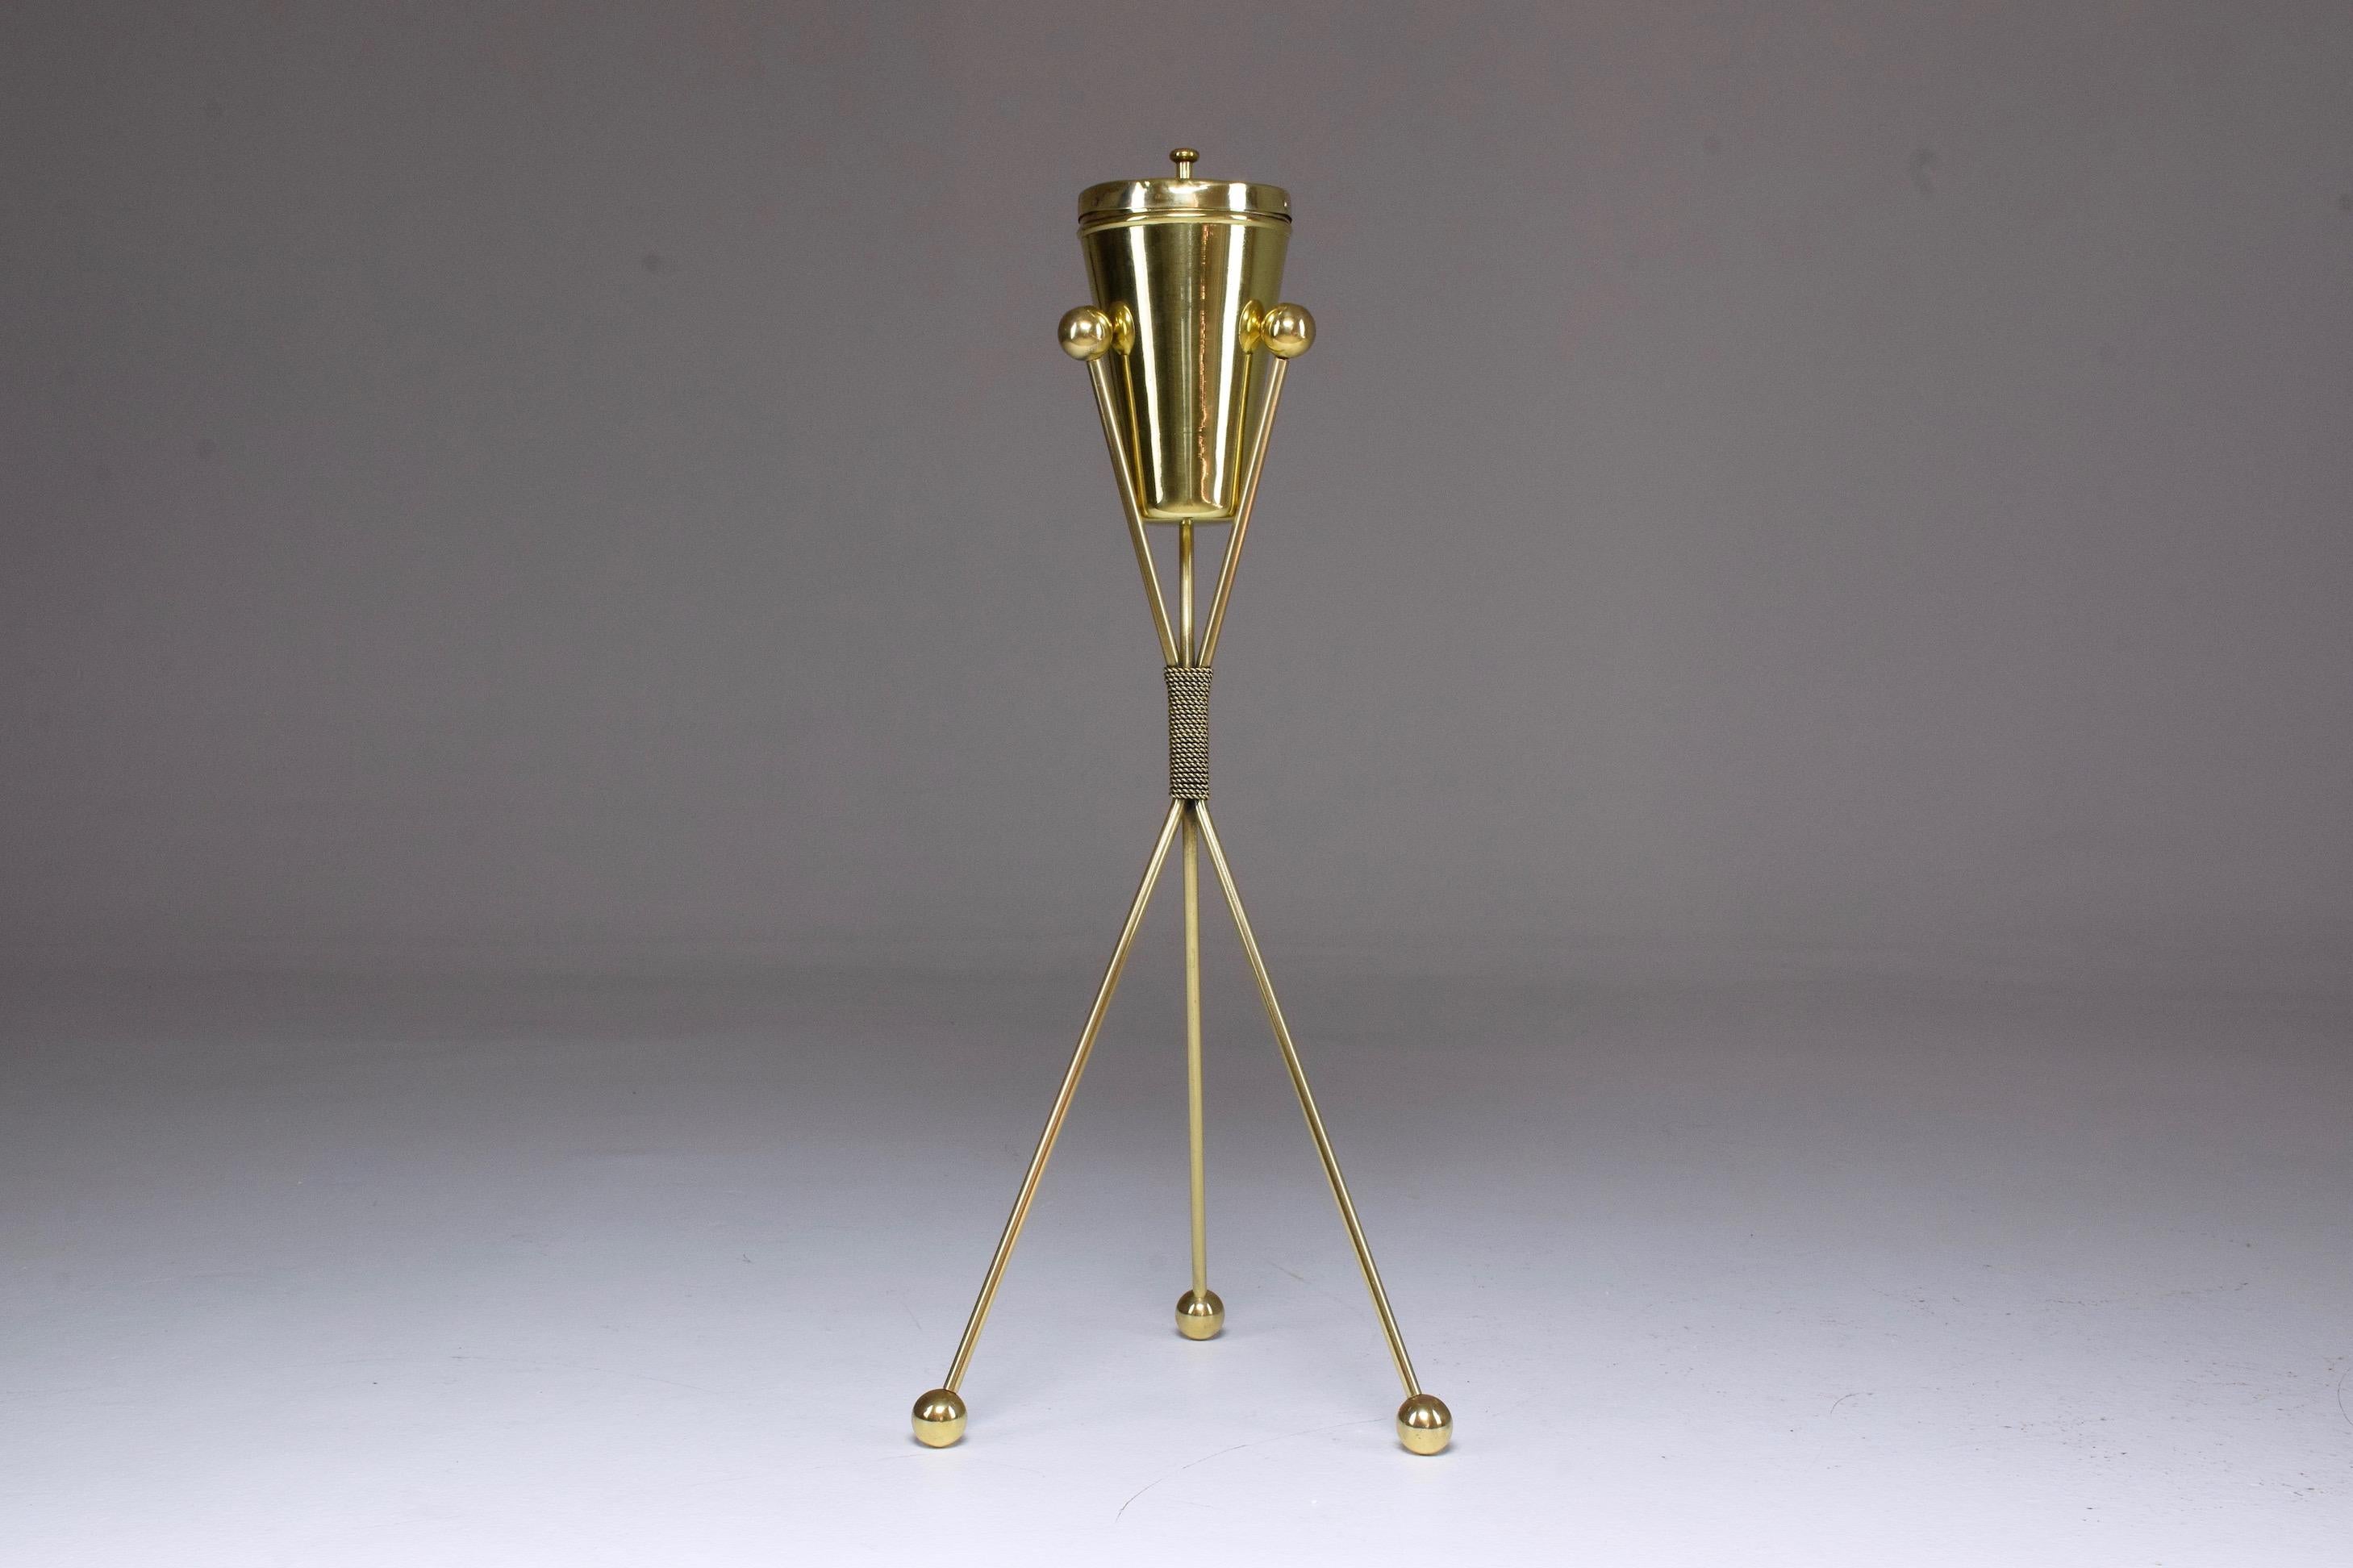 A 20th century vintage standing ashtray in solid gold polished brass with three cigarette holders and a pushdown system sitting on a stylish tripod base with boule shaped endings.
A very cool decorative piece for any living area.
Italy, circa